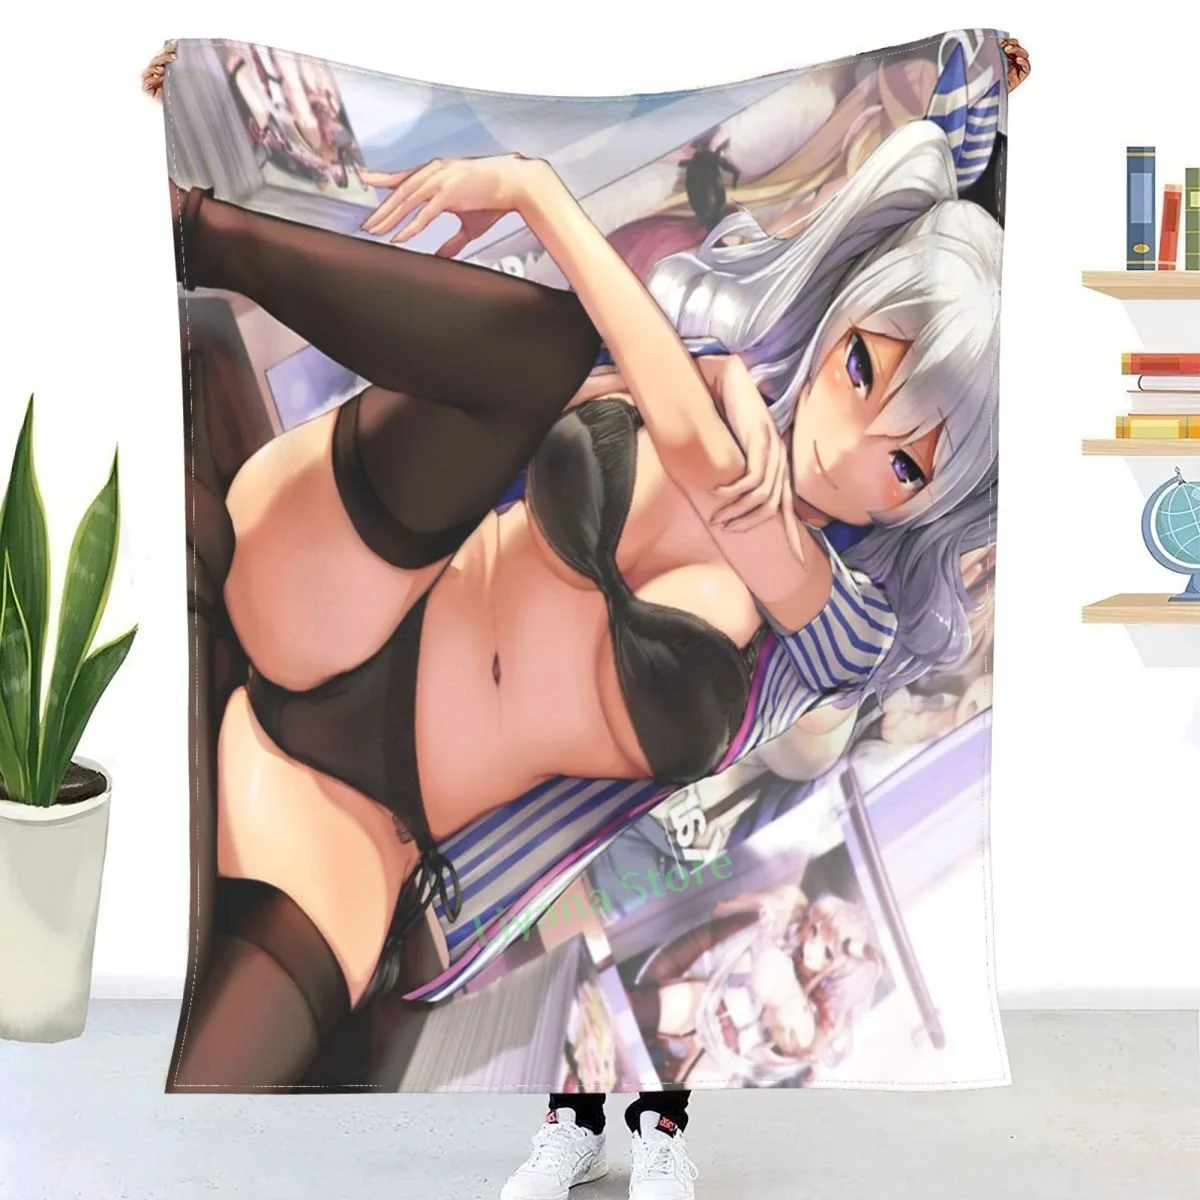 1200px x 1200px - Sexy Anime Girl In Beautiful Lingerie Throw Blanket 3d Printed Sofa Bedroom  Decorative Blanket Children Adult Christmas Gift - Blanket - AliExpress